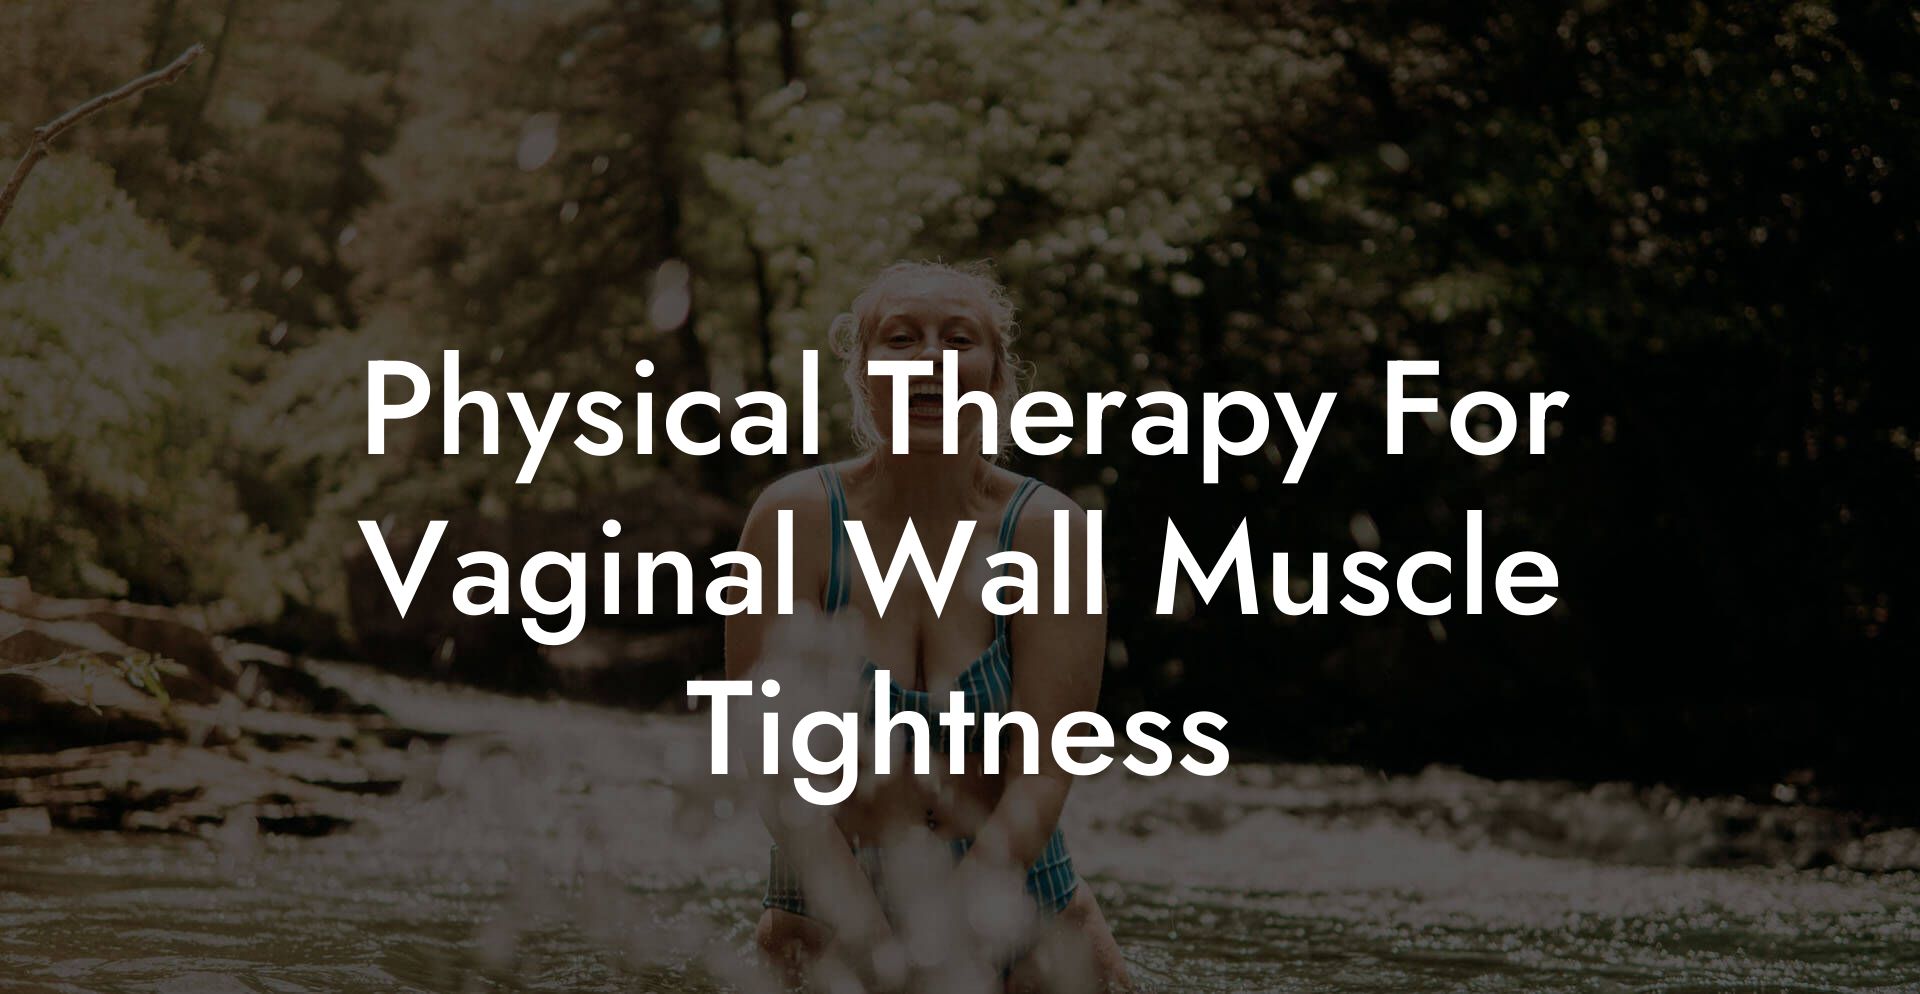 Physical Therapy For Vaginal Wall Muscle Tightness